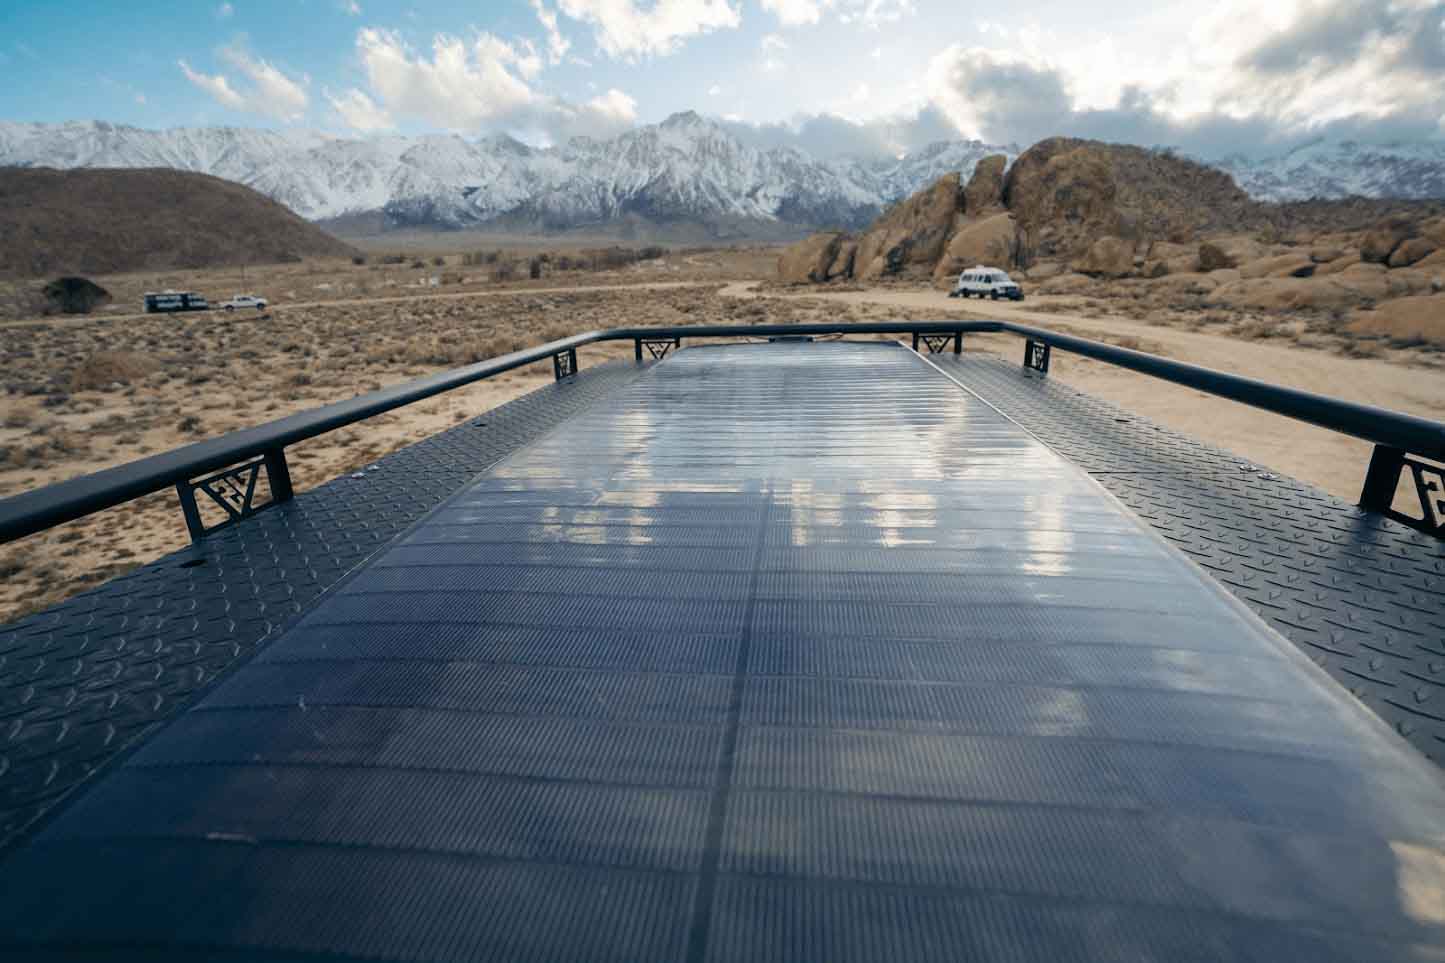 foldable RV solar panels and flexible Yuma CIGS solar panels can be set up quickly